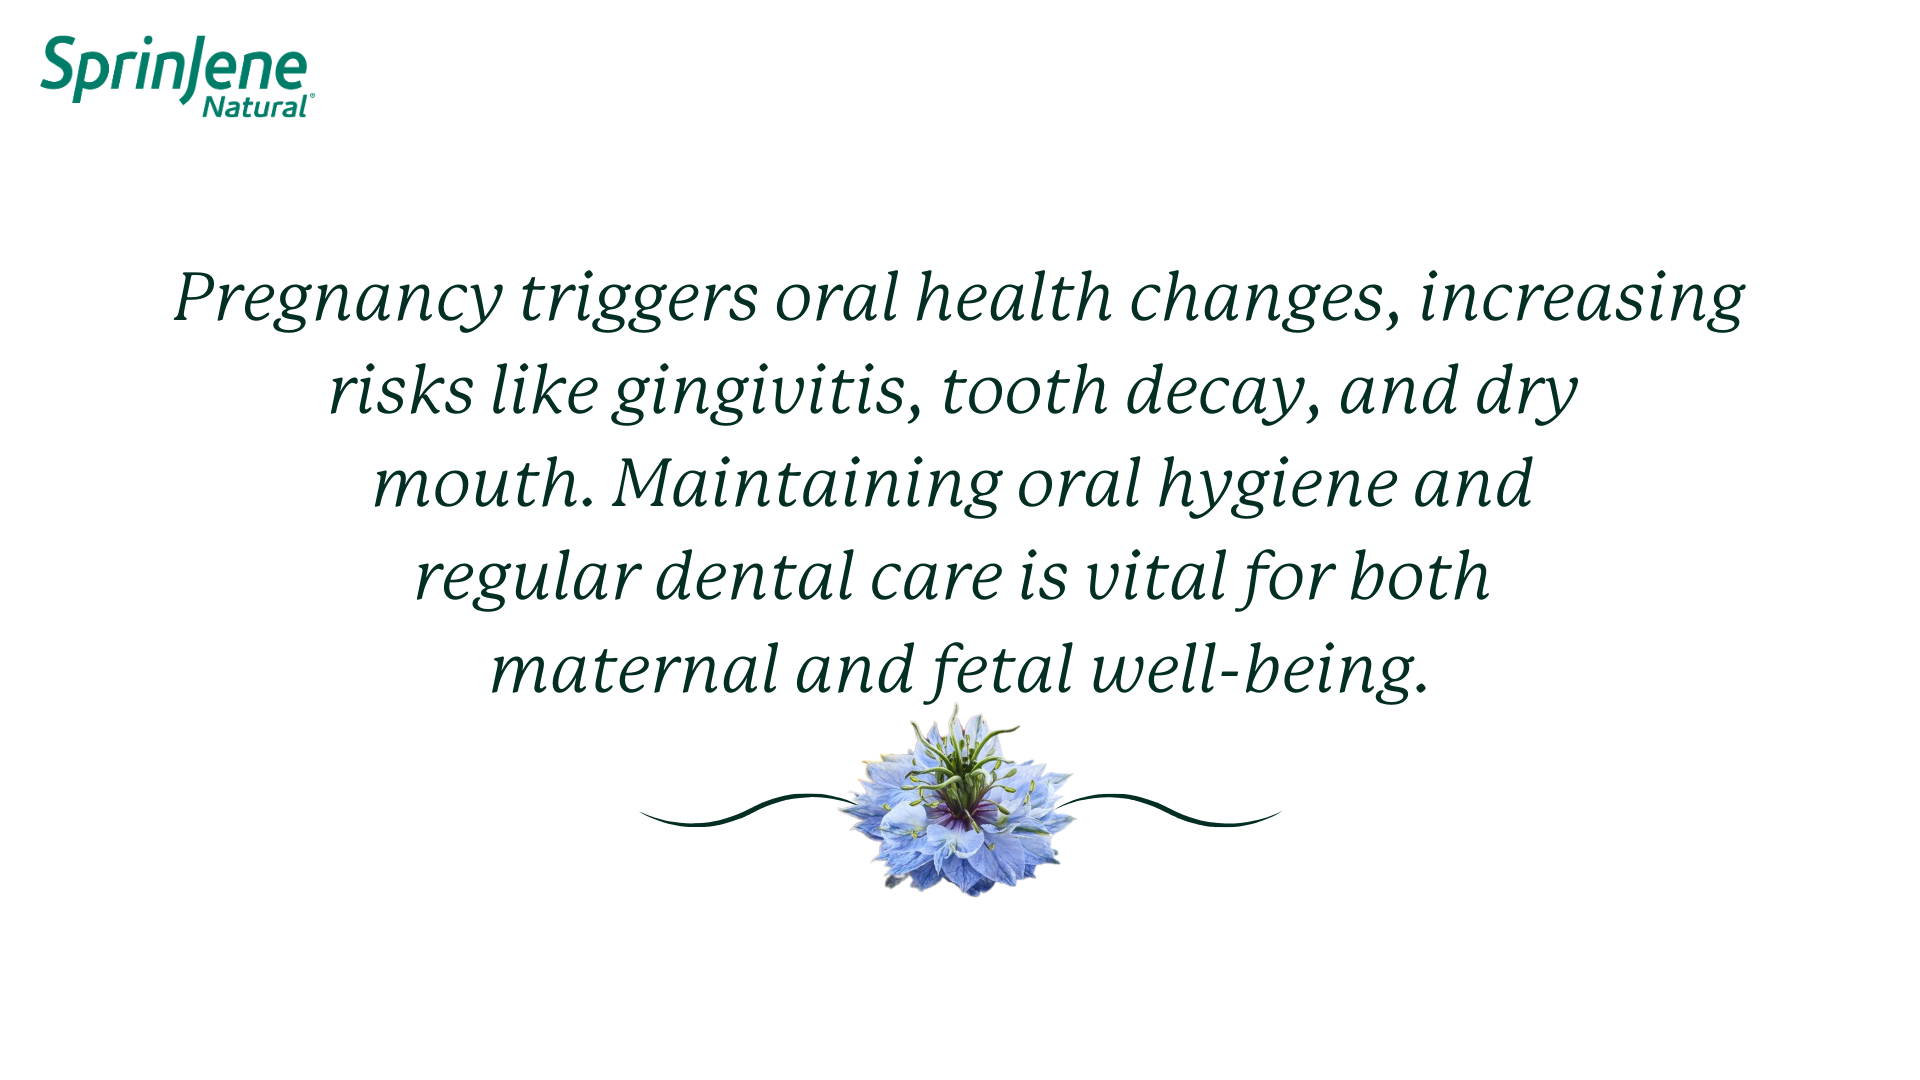 Pregnancy triggers oral health changes, increasing risks like gingivitis, tooth decay, and dry mouth. Maintaining oral hygiene and regular dental care is vital for both maternal and fetal well-being.